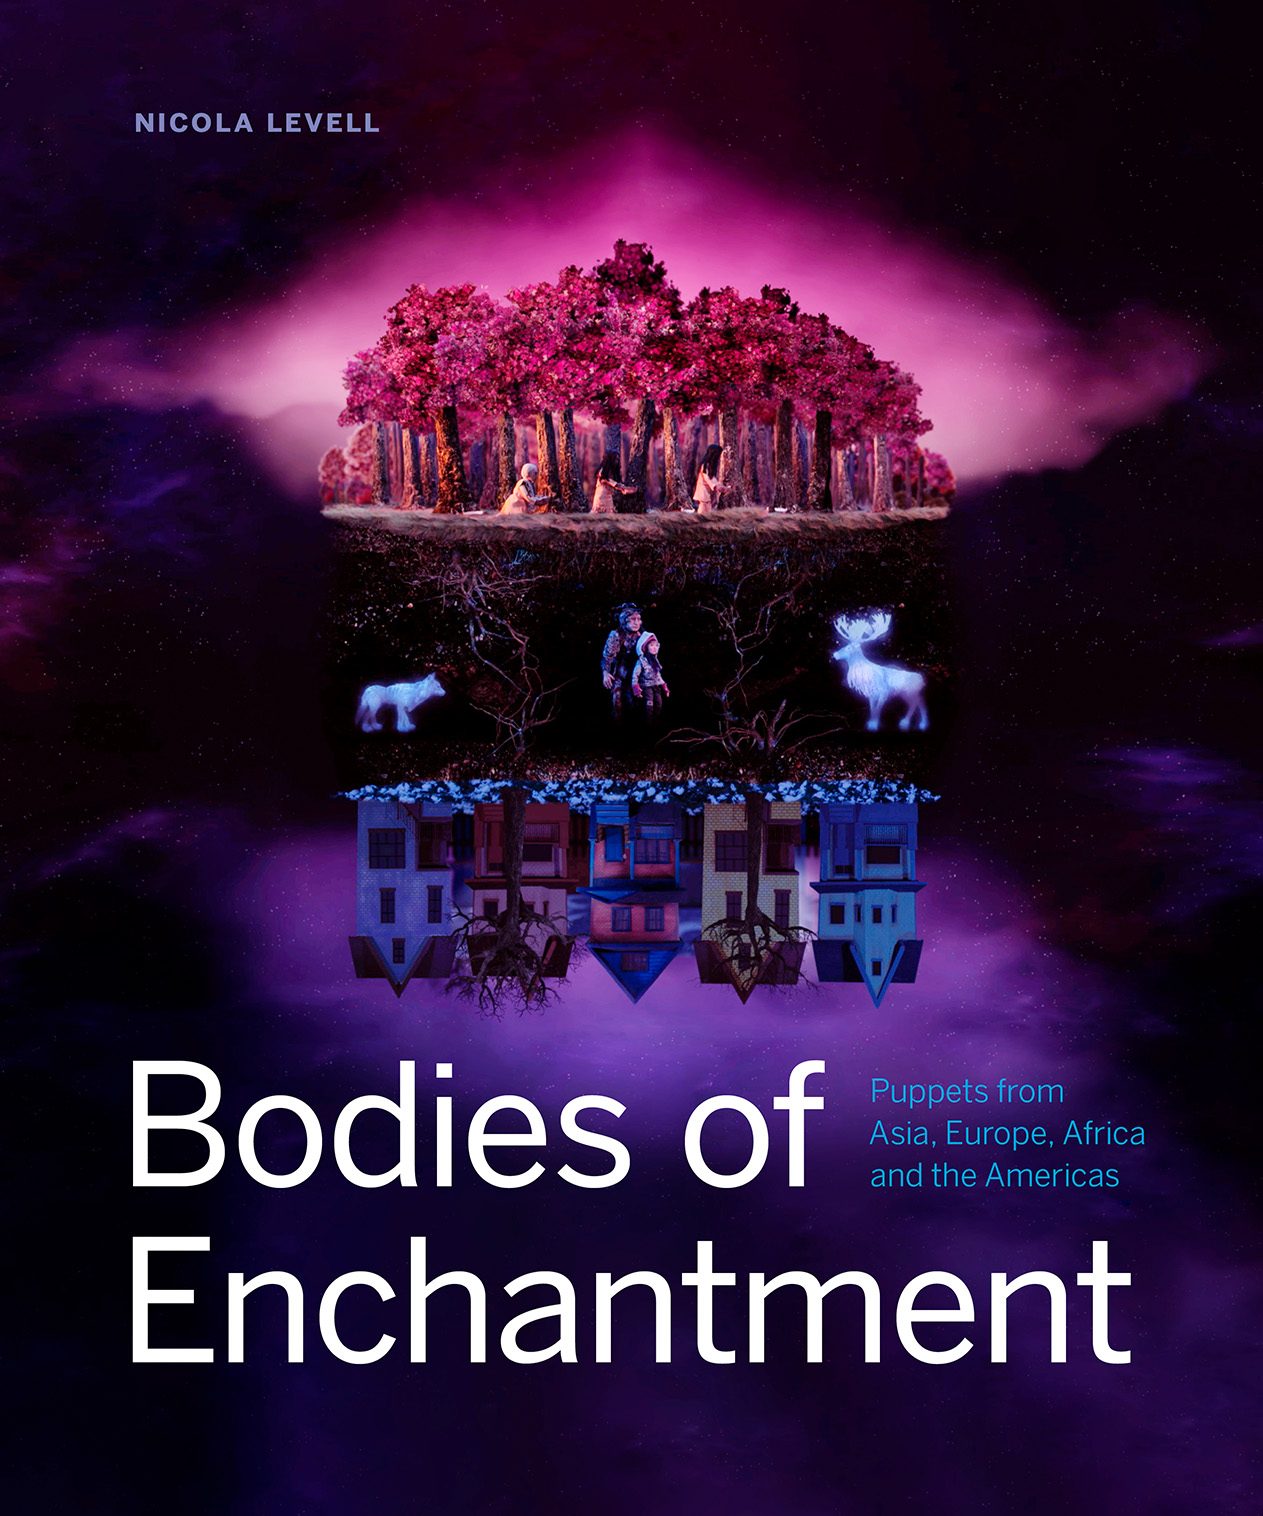 Bodies of Enchantment